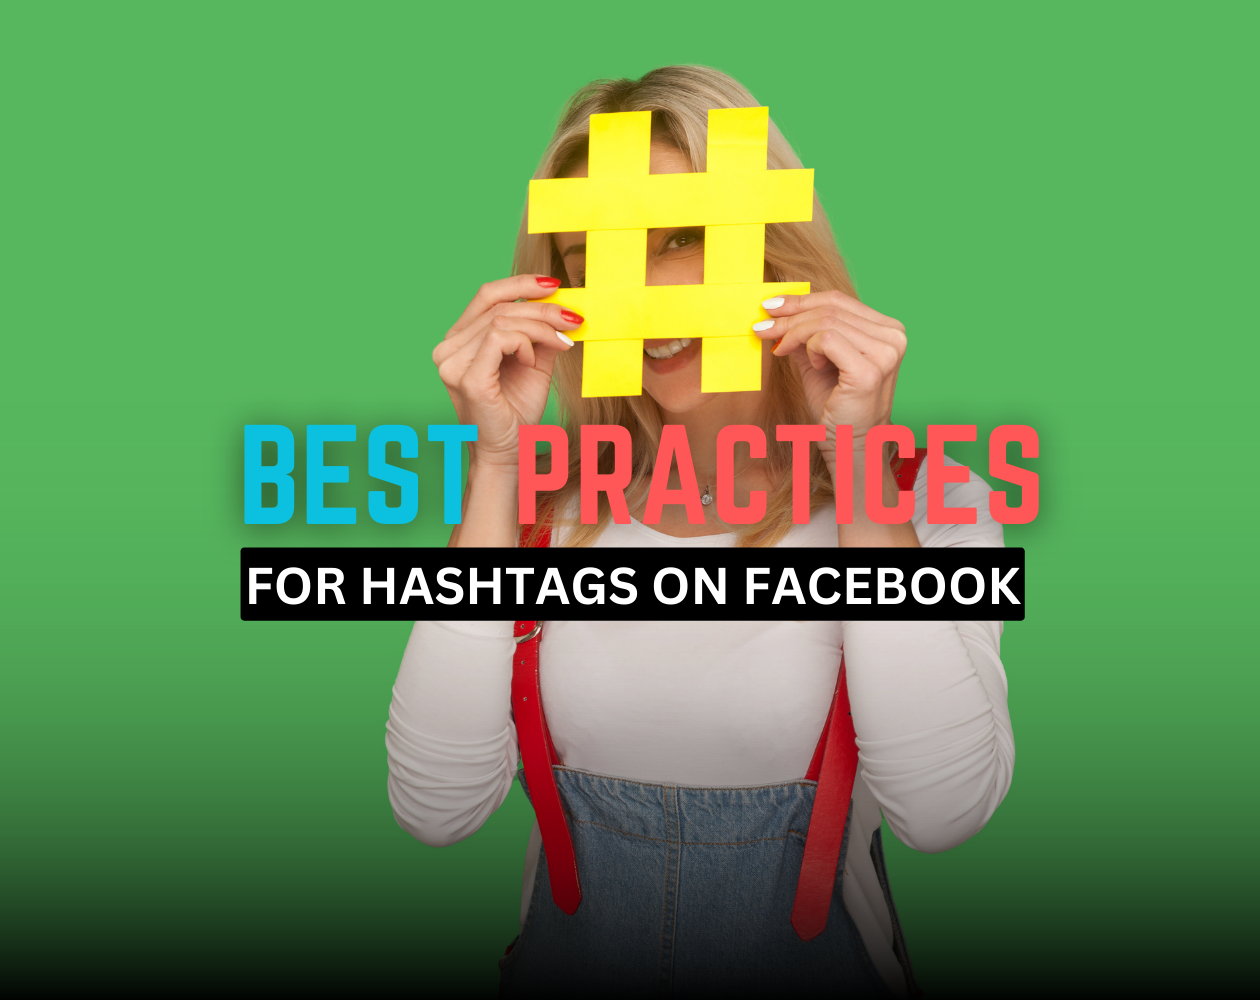 Best Practices For Facebook Hashtags in 2024   Hashtags have become ubiquitous across social media, and Facebook is no exception. Strategic use of hashtags can help expand your reach and engagement on Facebook. But there's a right and wrong way to maximiz